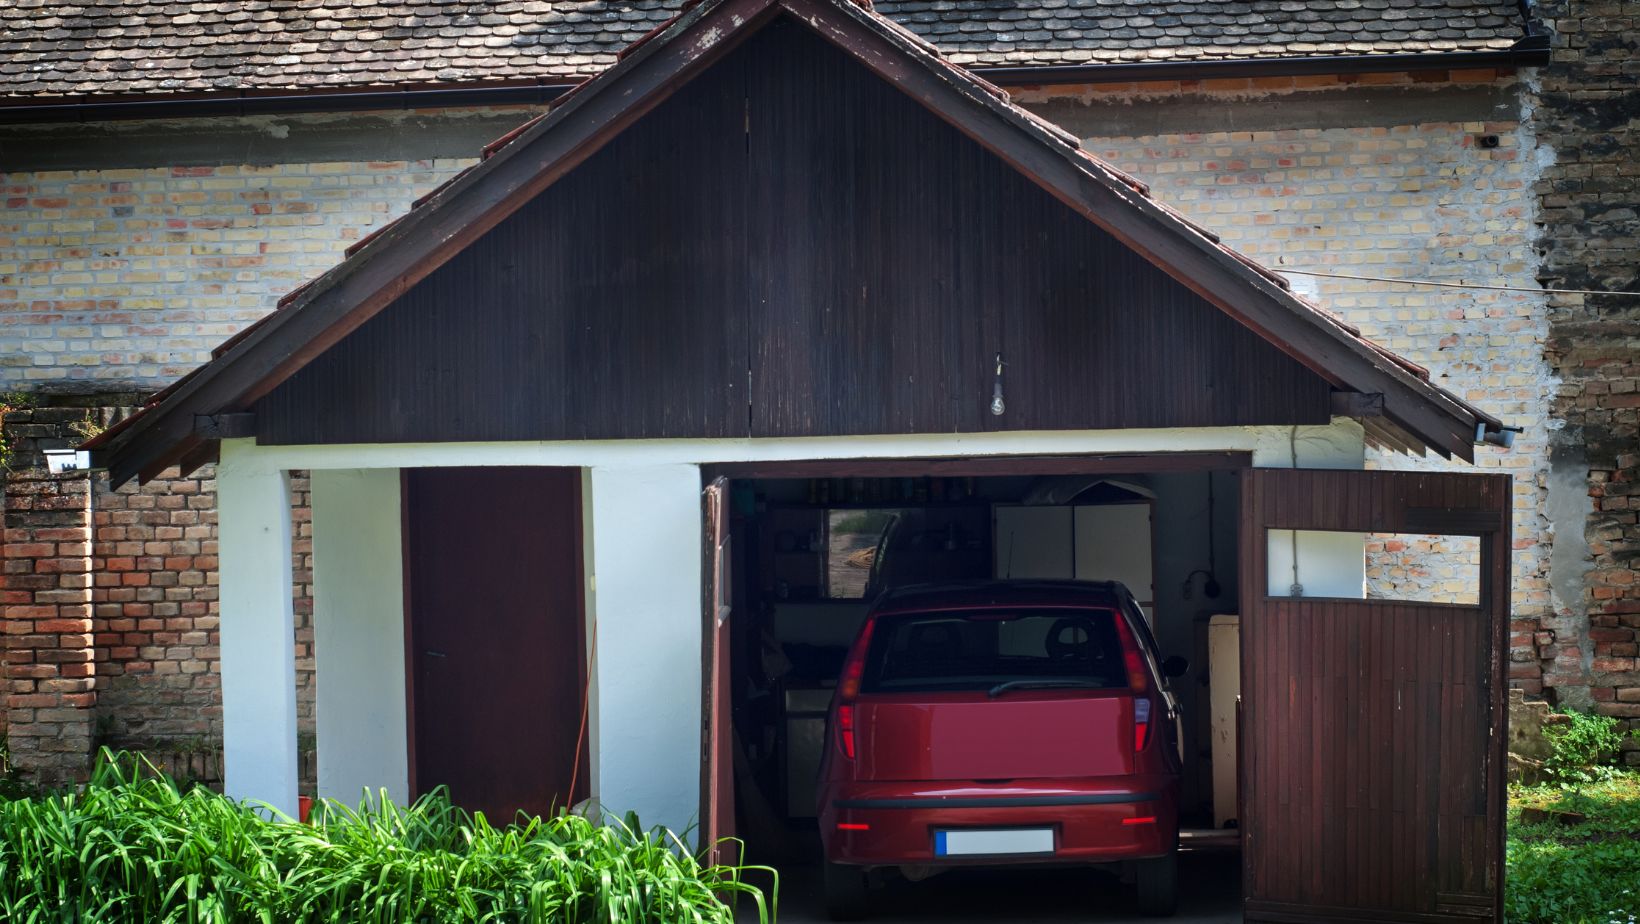 how to cover garage walls for party